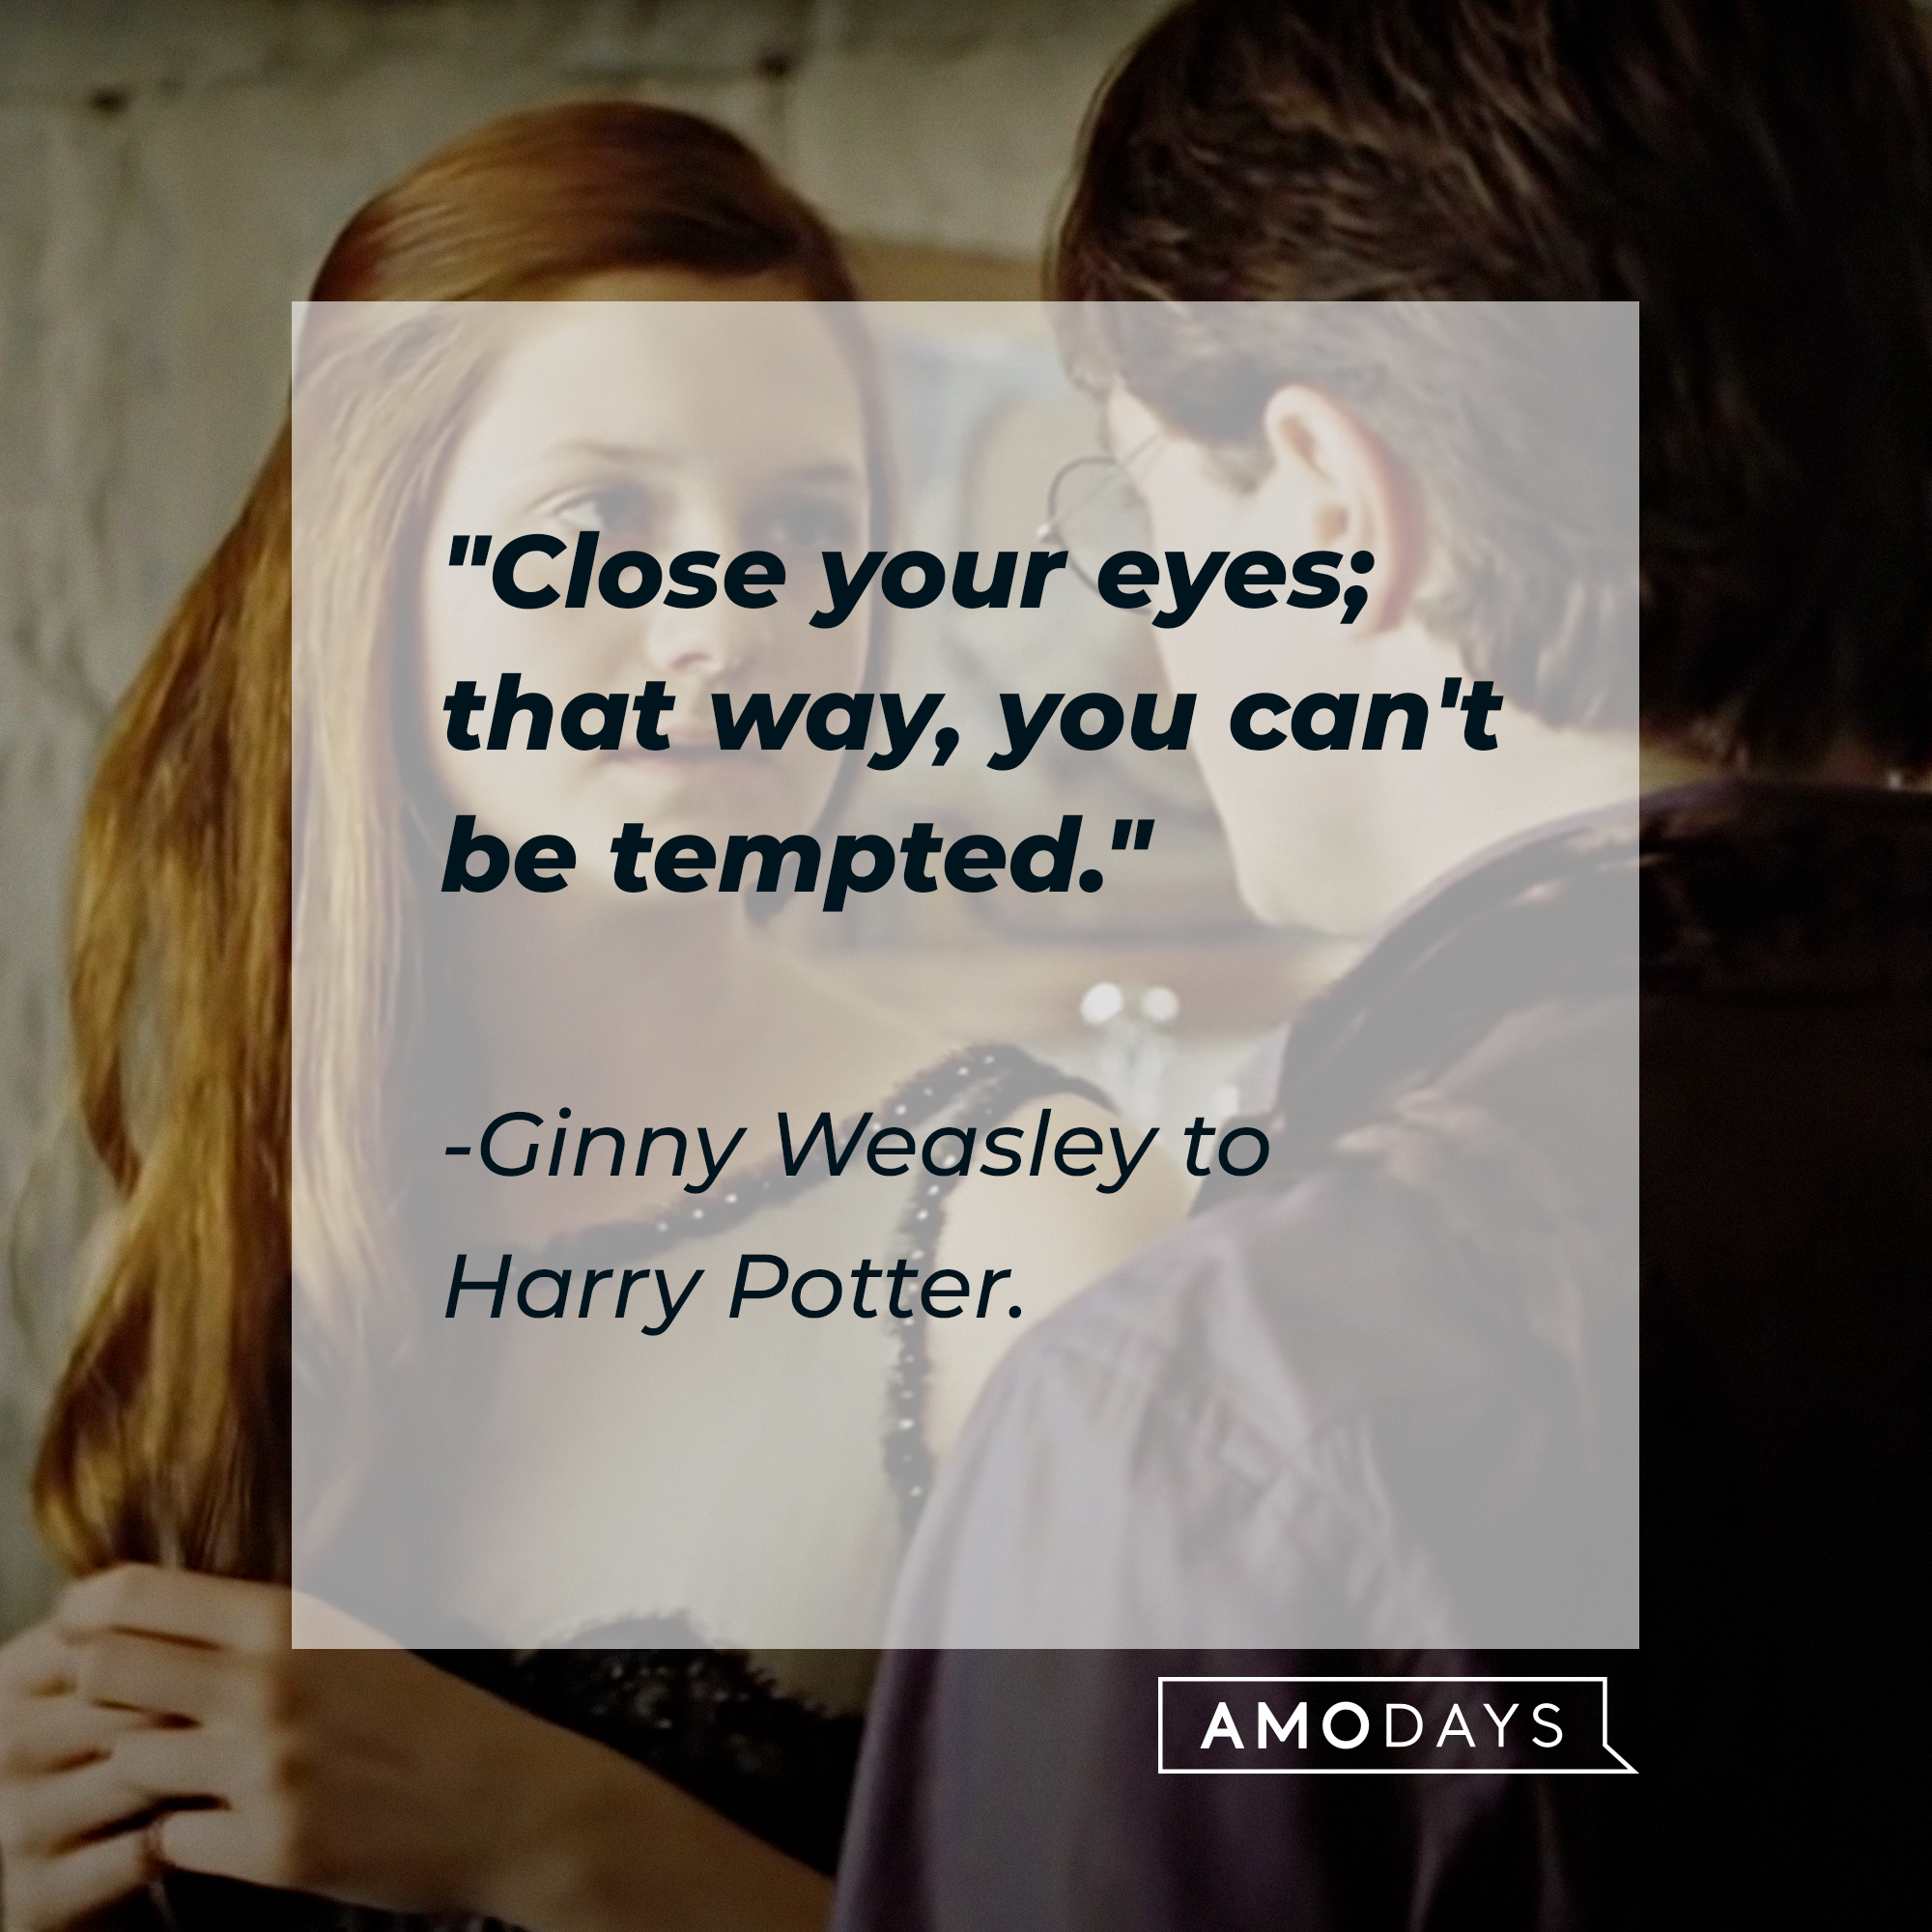 Ginny Weasley’s quote:  "Close your eyes; that way, you can't be tempted." | Image: Youtube.com/harrypotter